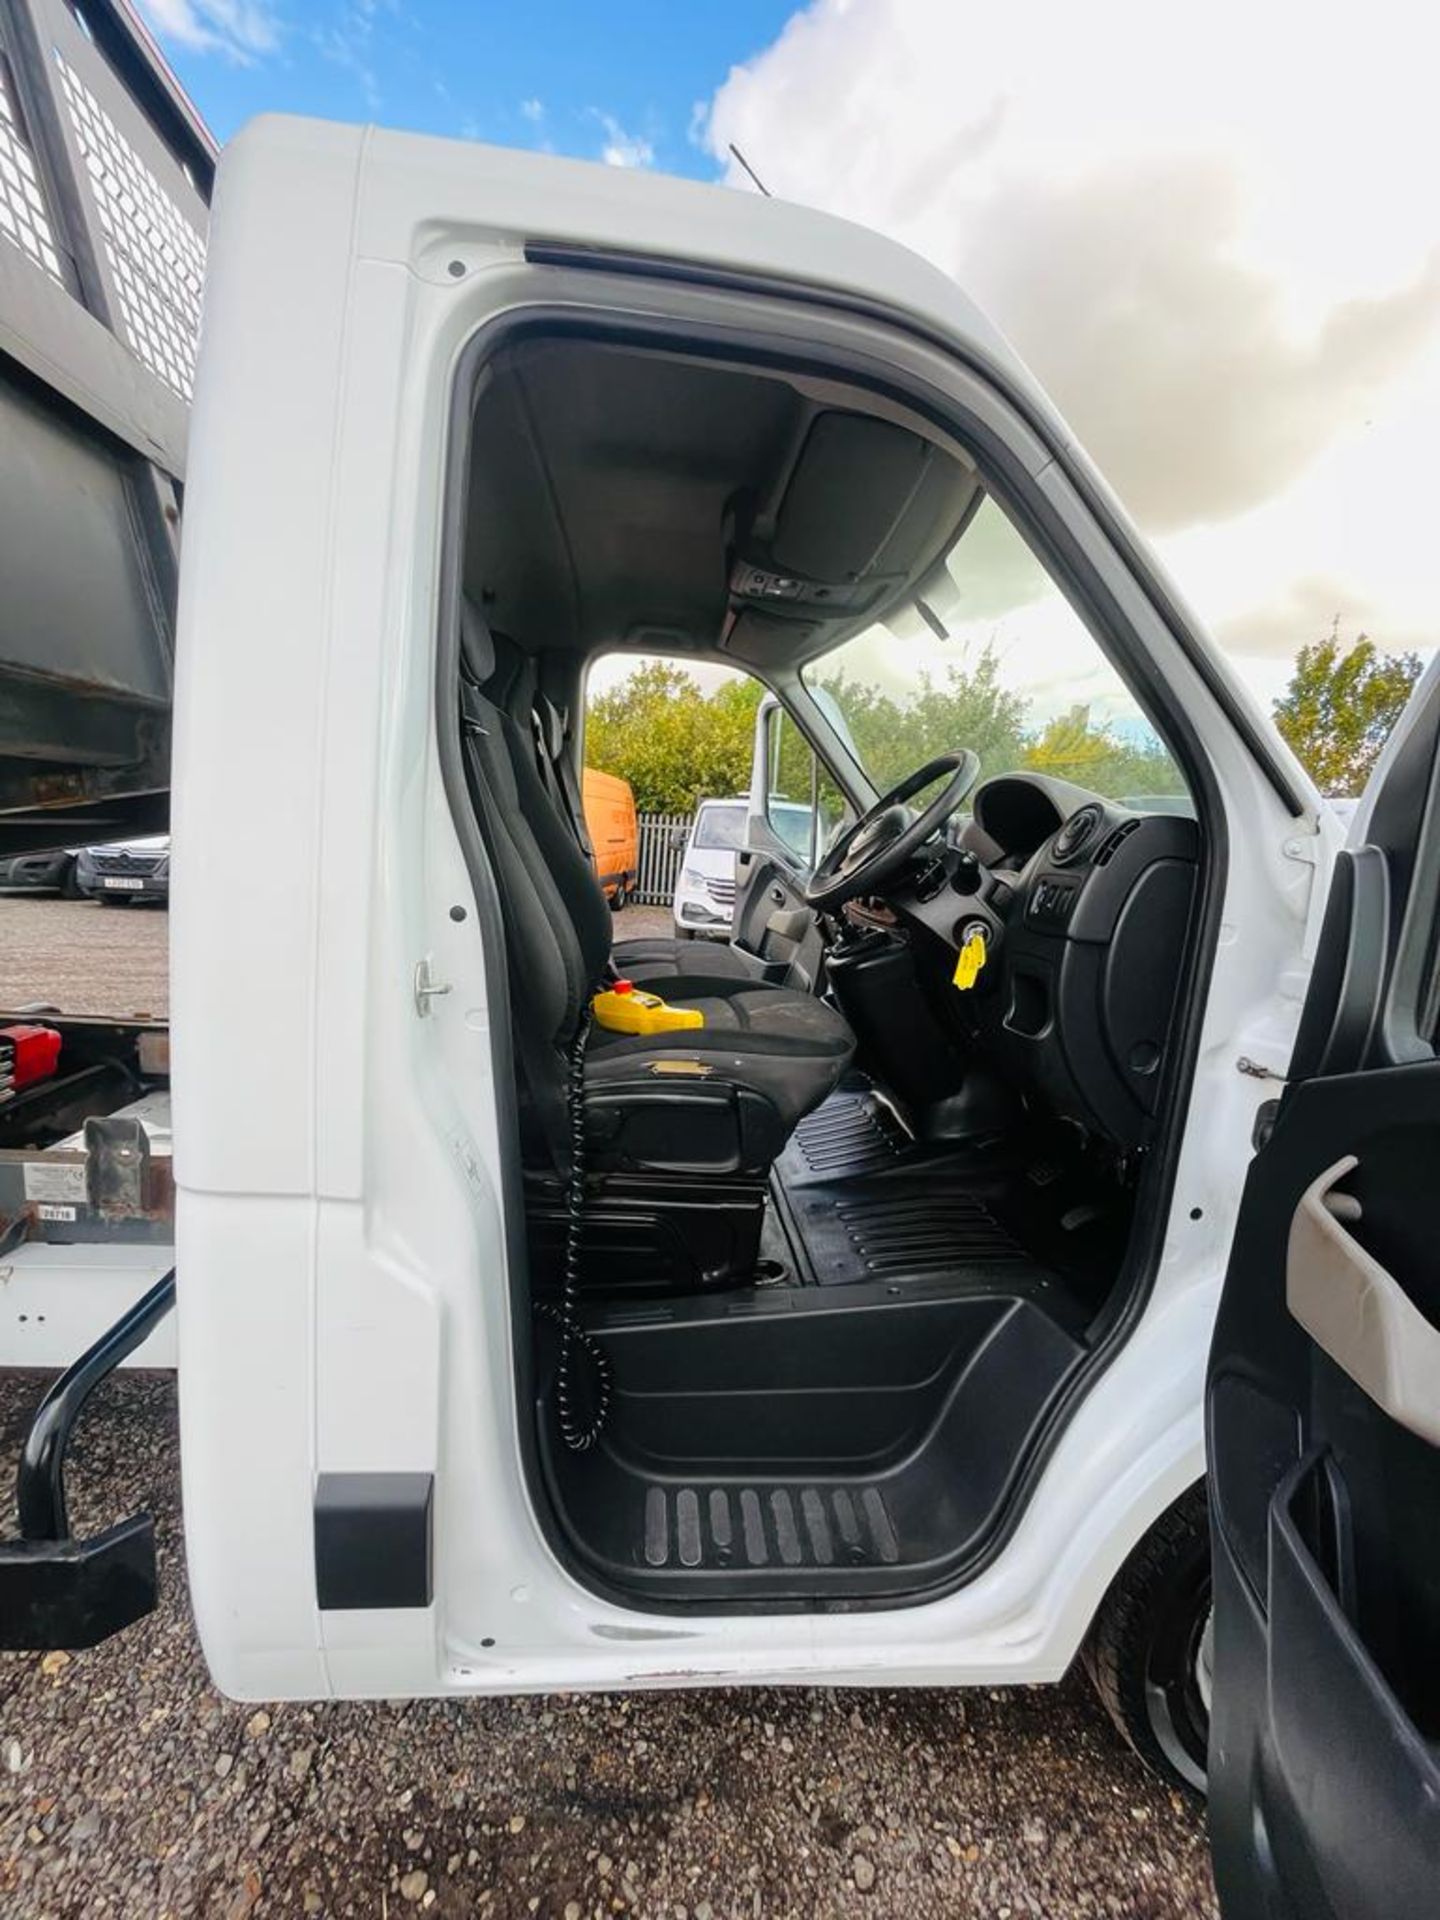 ** ON SALE ** Vauxhall Movano 2.3 CDTI RWD TRW R3500 2015 '15 Reg' Tipper - Only 110,779 Miles - Image 18 of 29